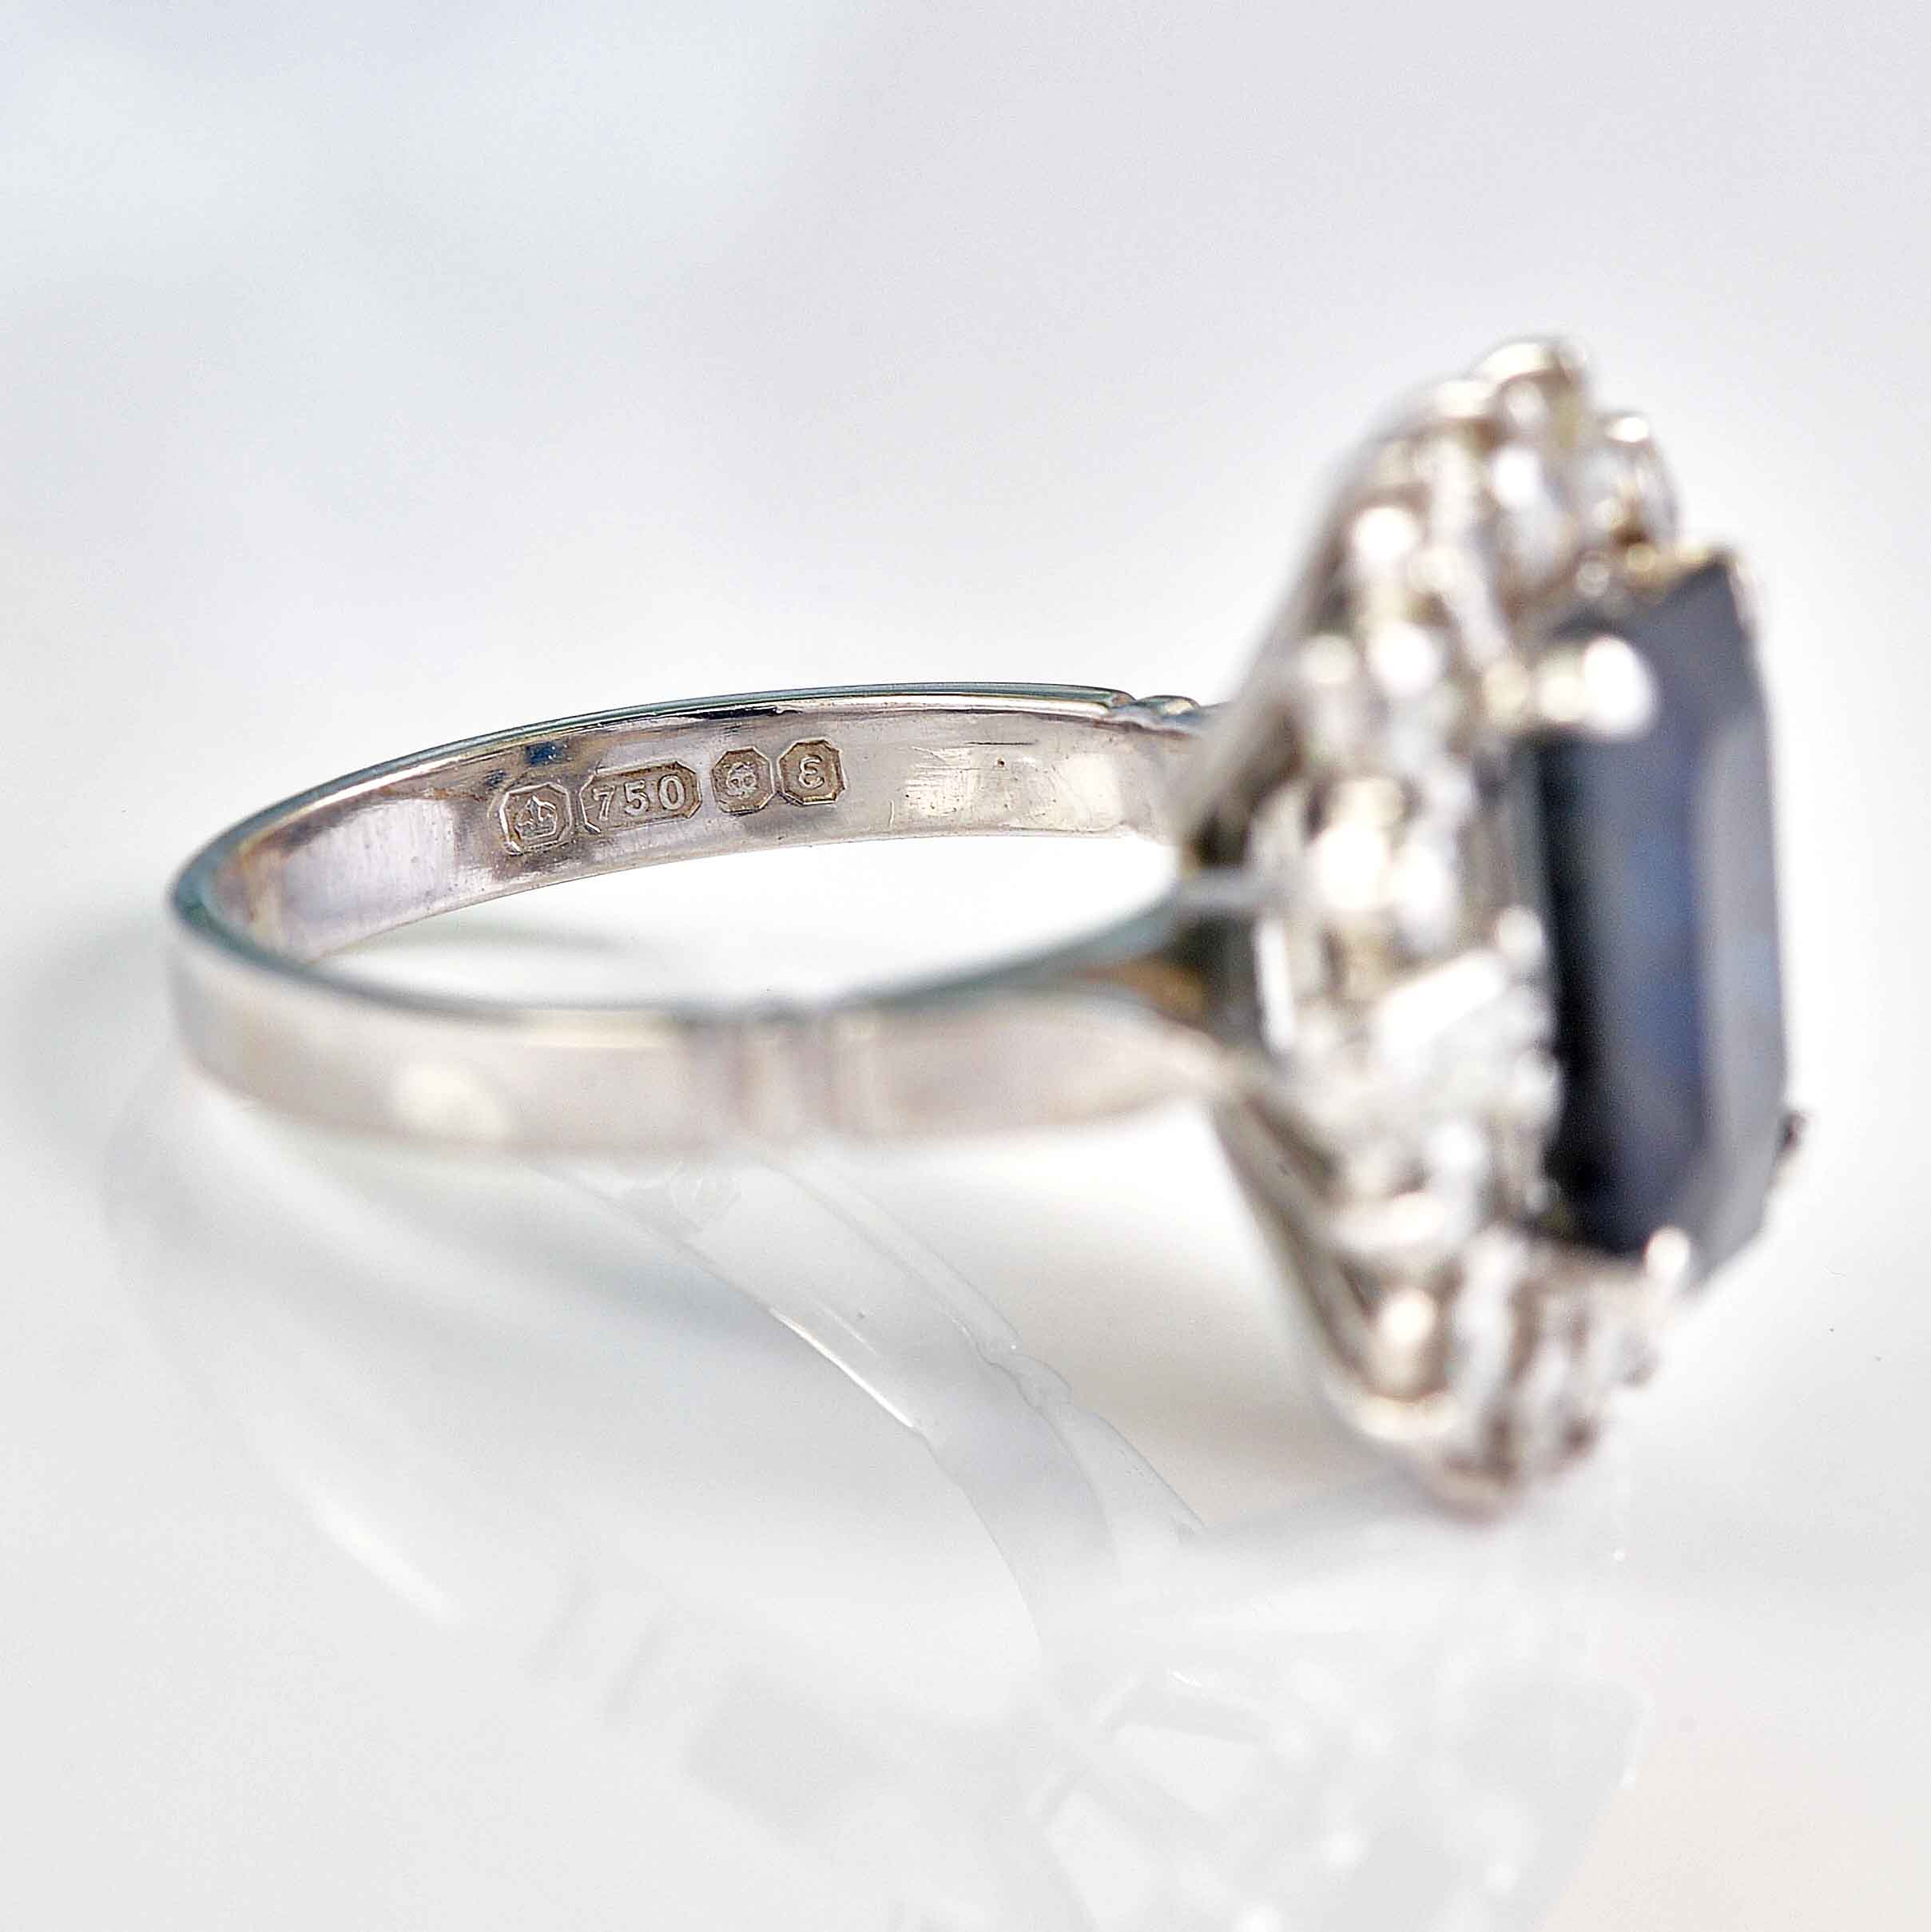 Ellibelle Jewellery Vintage 1979 Sapphire & Diamond 18ct White Gold Cluster Engagement Ring